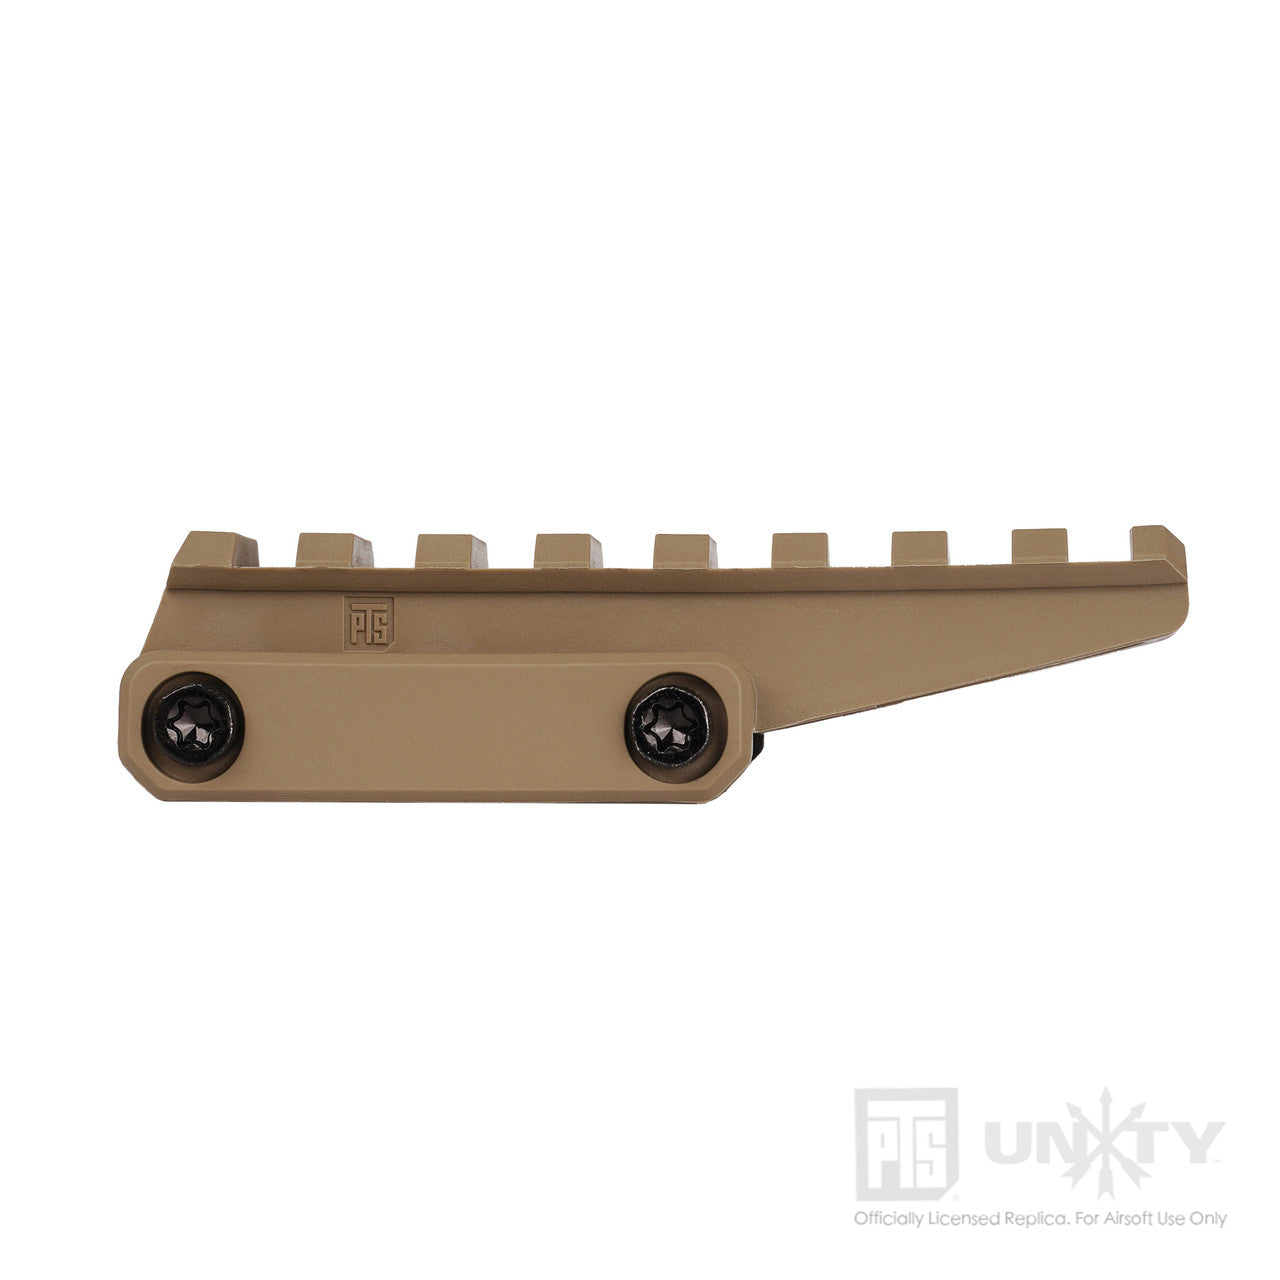 PTS Unity Tactical FAST Dupont Polymer Optic Riser FDE